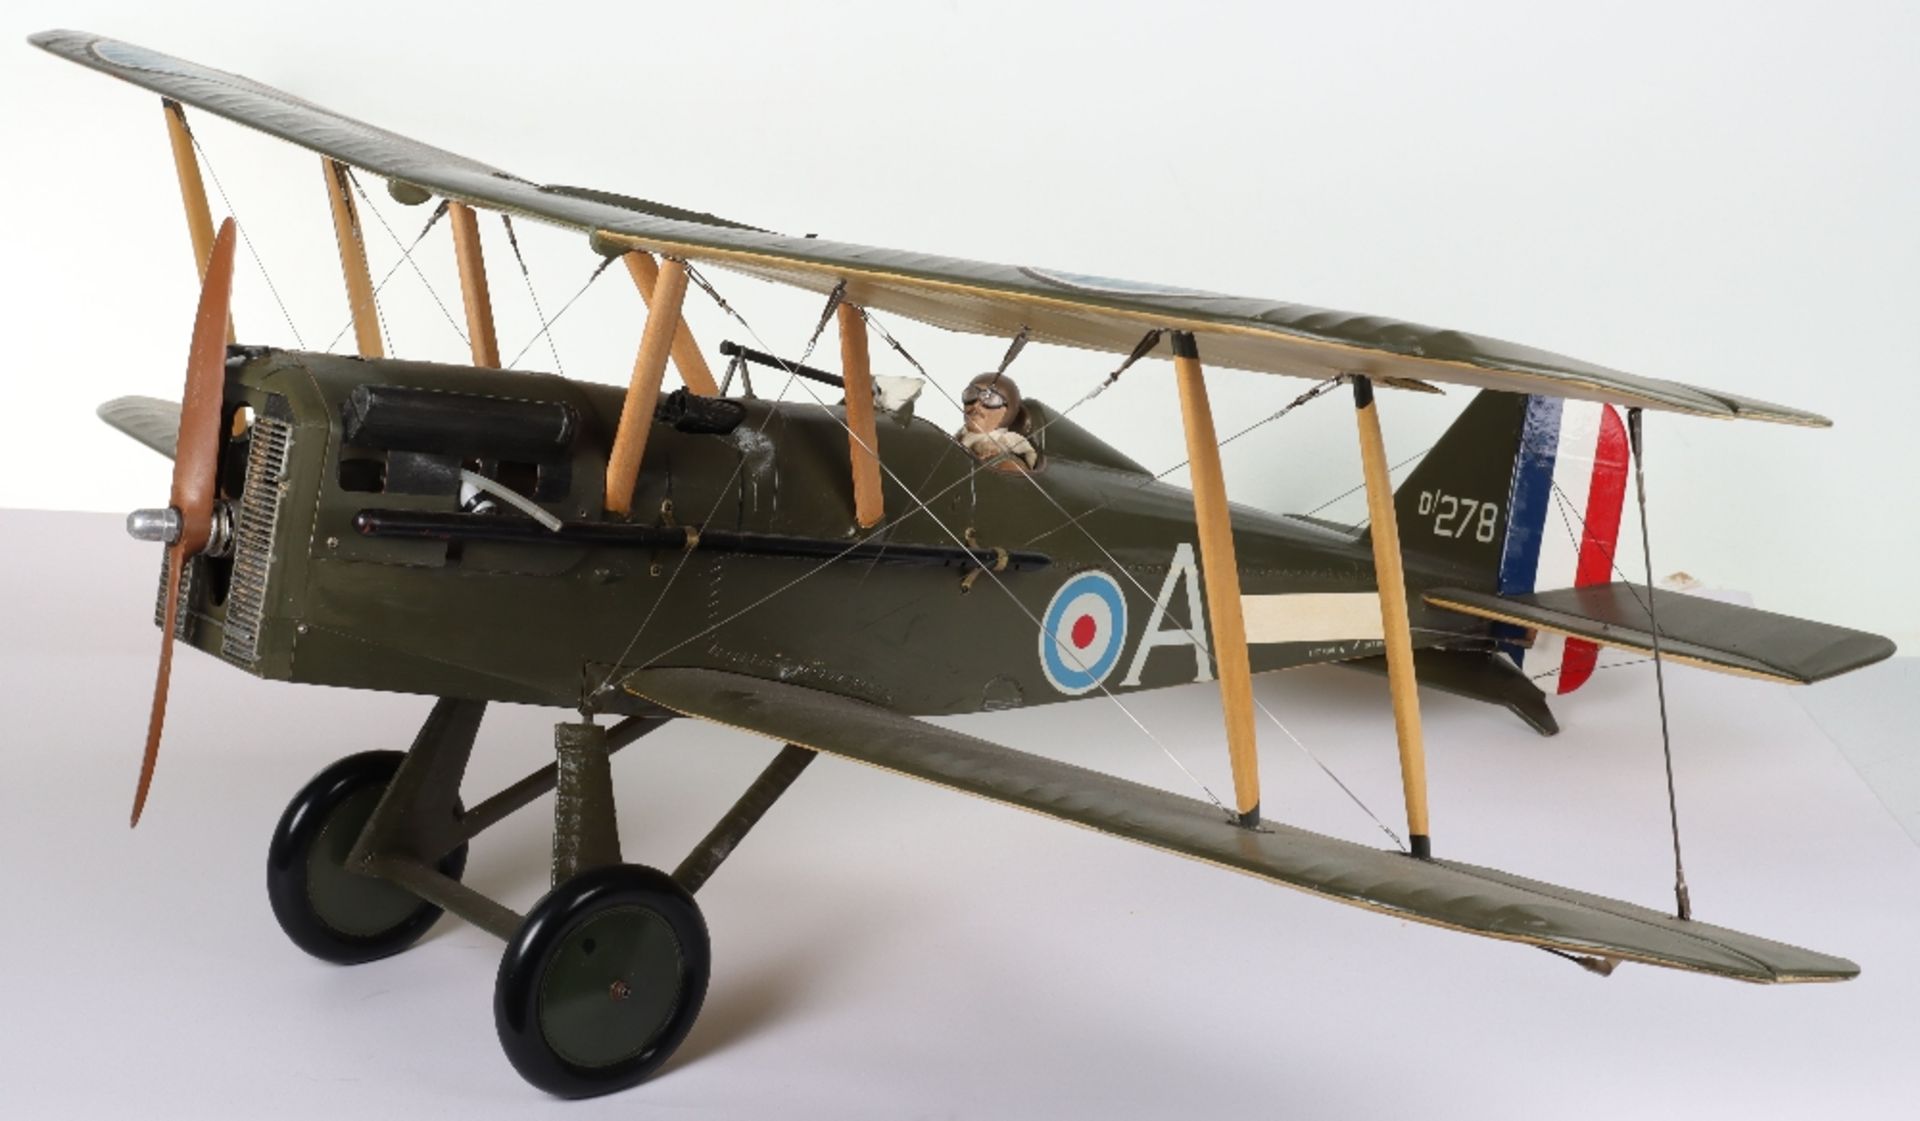 Impressive Working Model of a Royal Flying Corps SE5a Fighter Plane